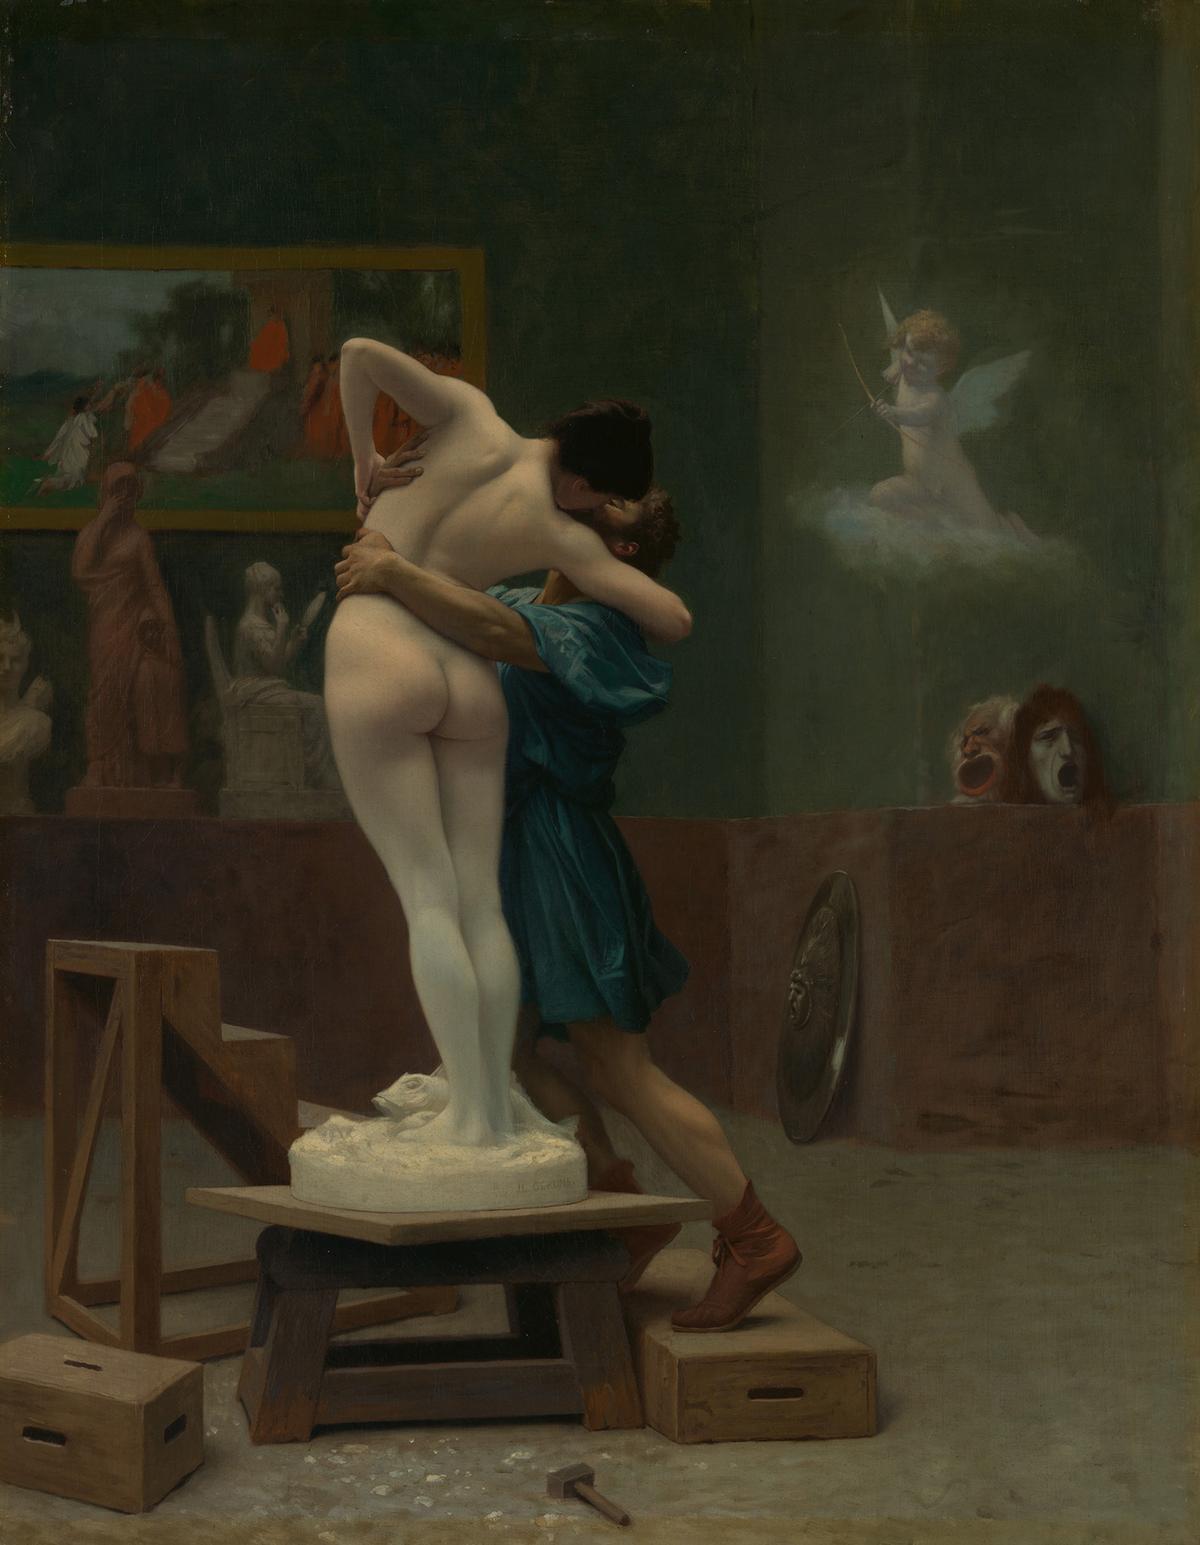 Pygmalion’s wish for a wife, as beautiful as his statue Galatea, is granted by Venus. "Pygmalion and Galatea," circa 1890, by Jean-Leon Gerome. Oil on canvas. The Metropolitan Museum of Art, New York. (Public Domain)